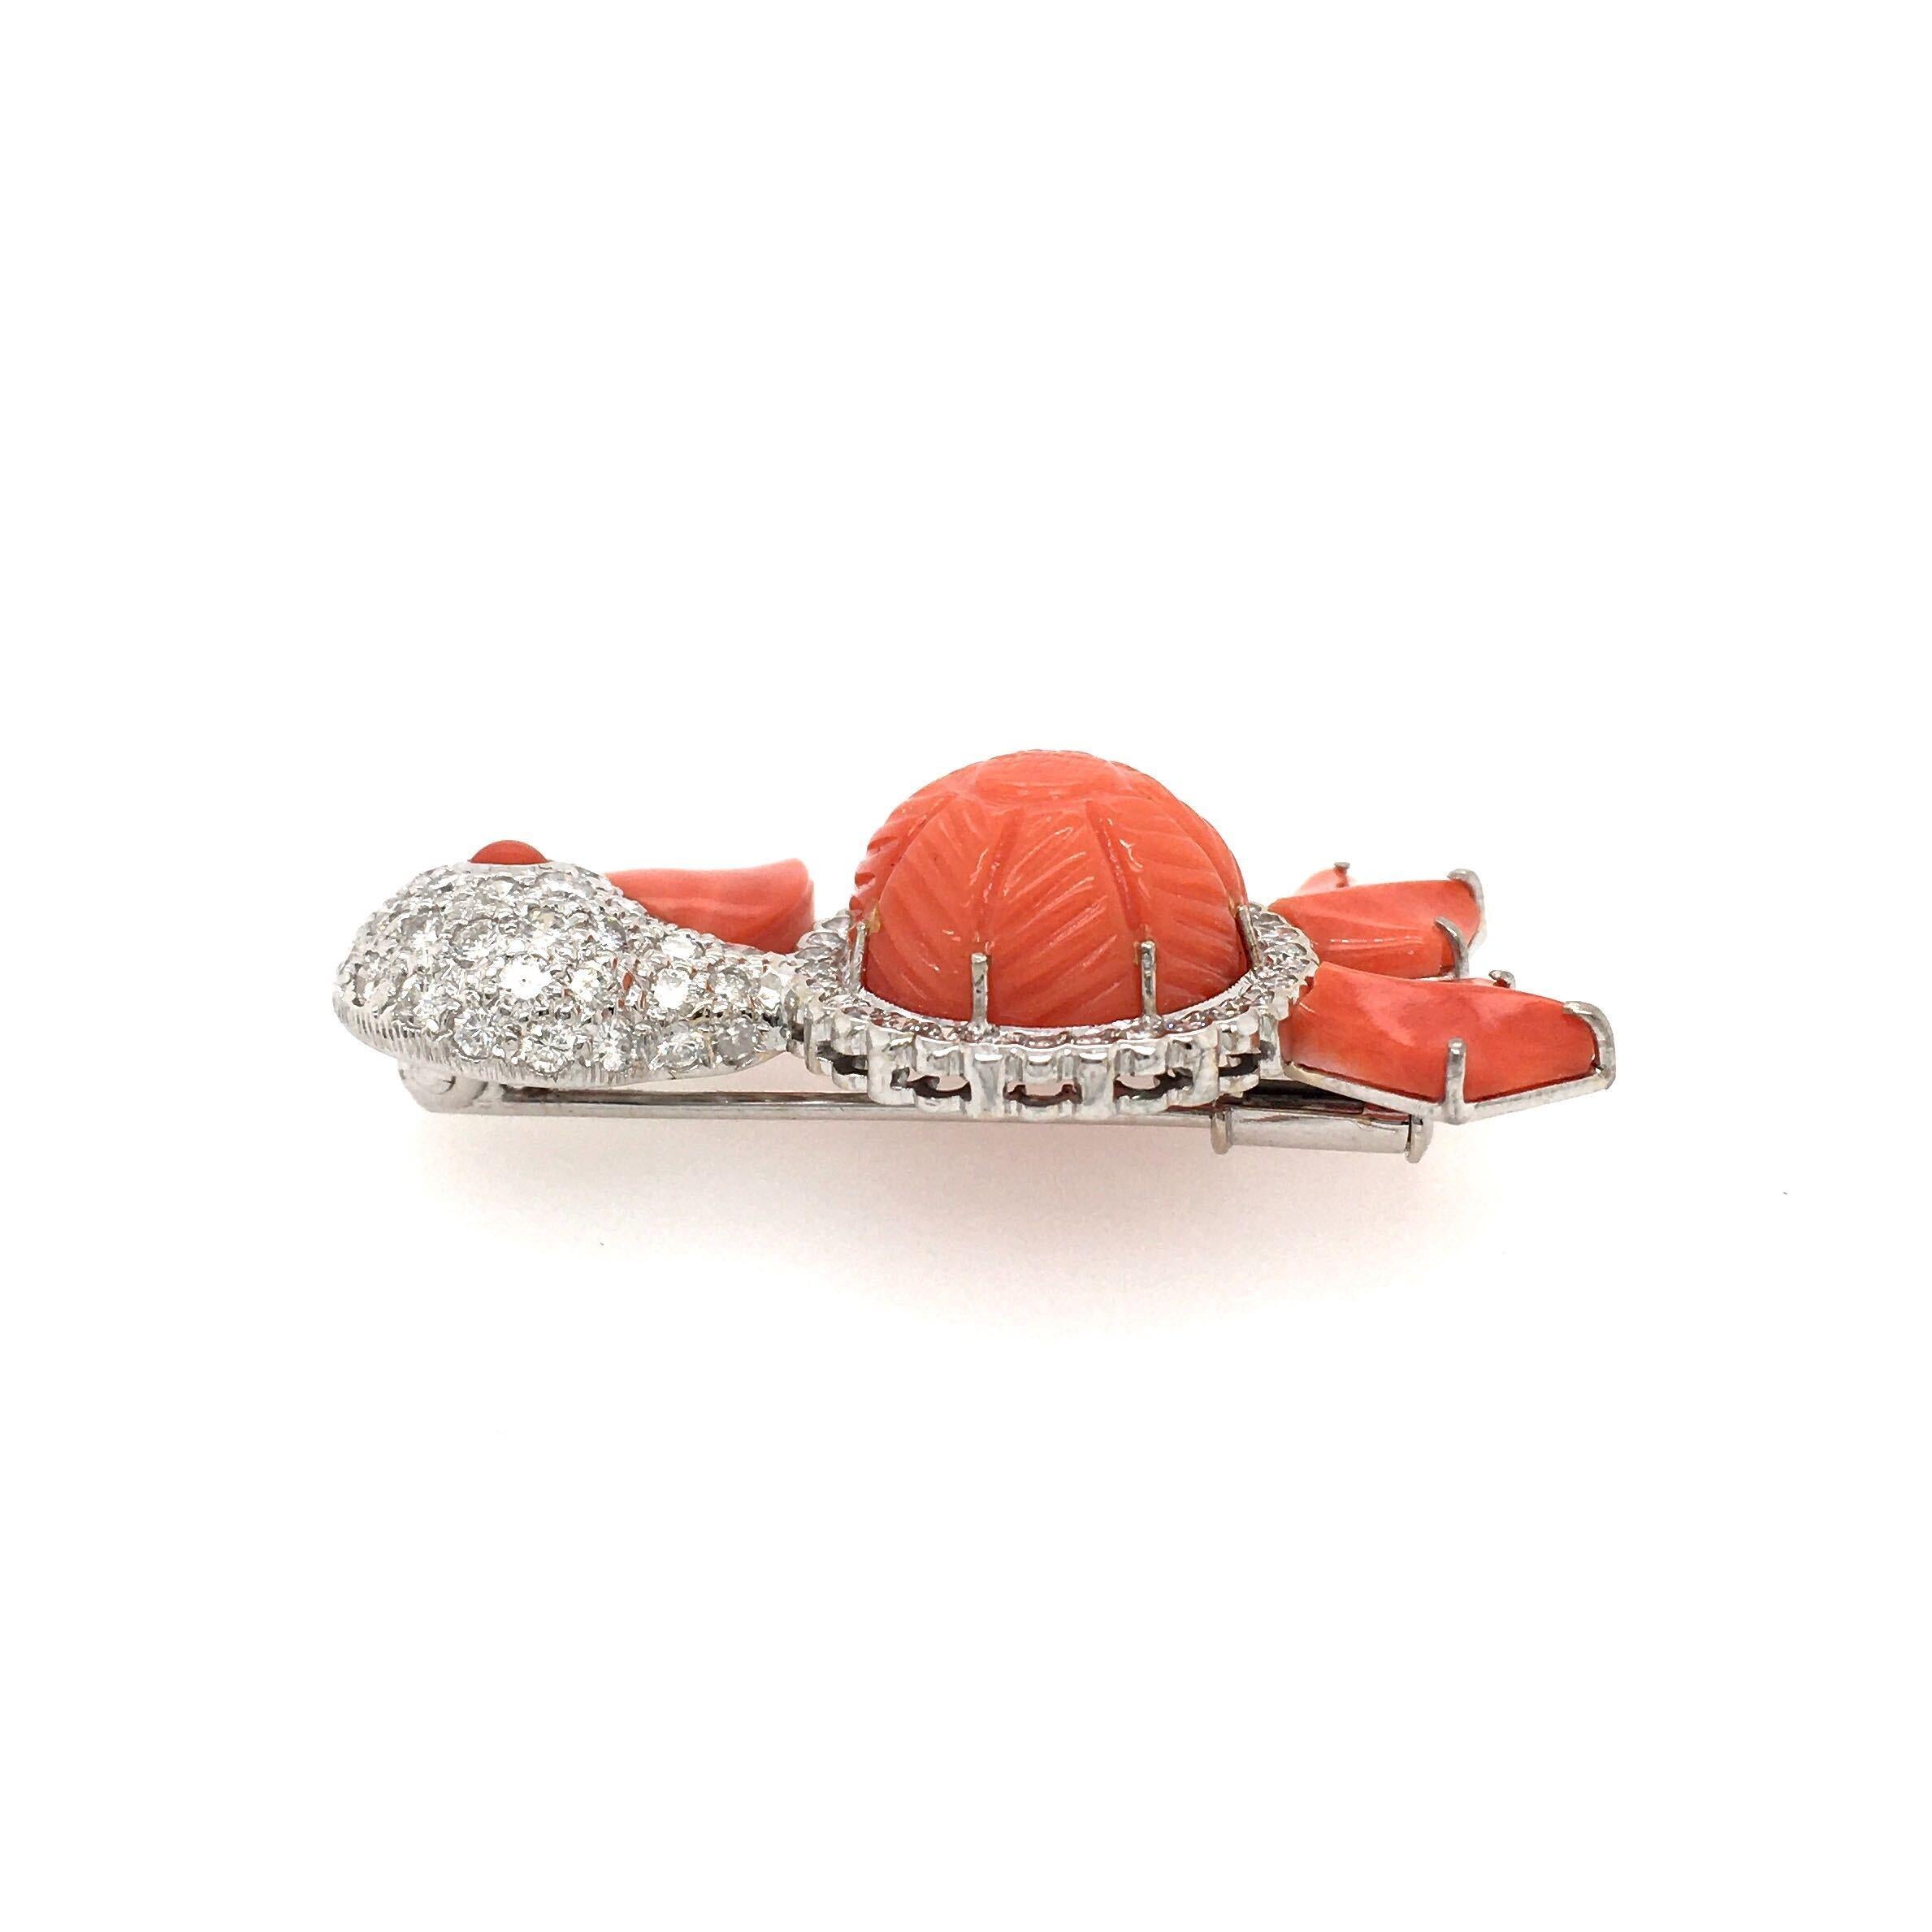 An 18 karat white gold, diamond and coral duck brooch. Designed as a pave set diamond duck, centering a carved coral belly enhanced by coral beak, feet and eye. Seventy (70) diamonds weigh approximately 1.40 carats. Length is approximately 1 5/8